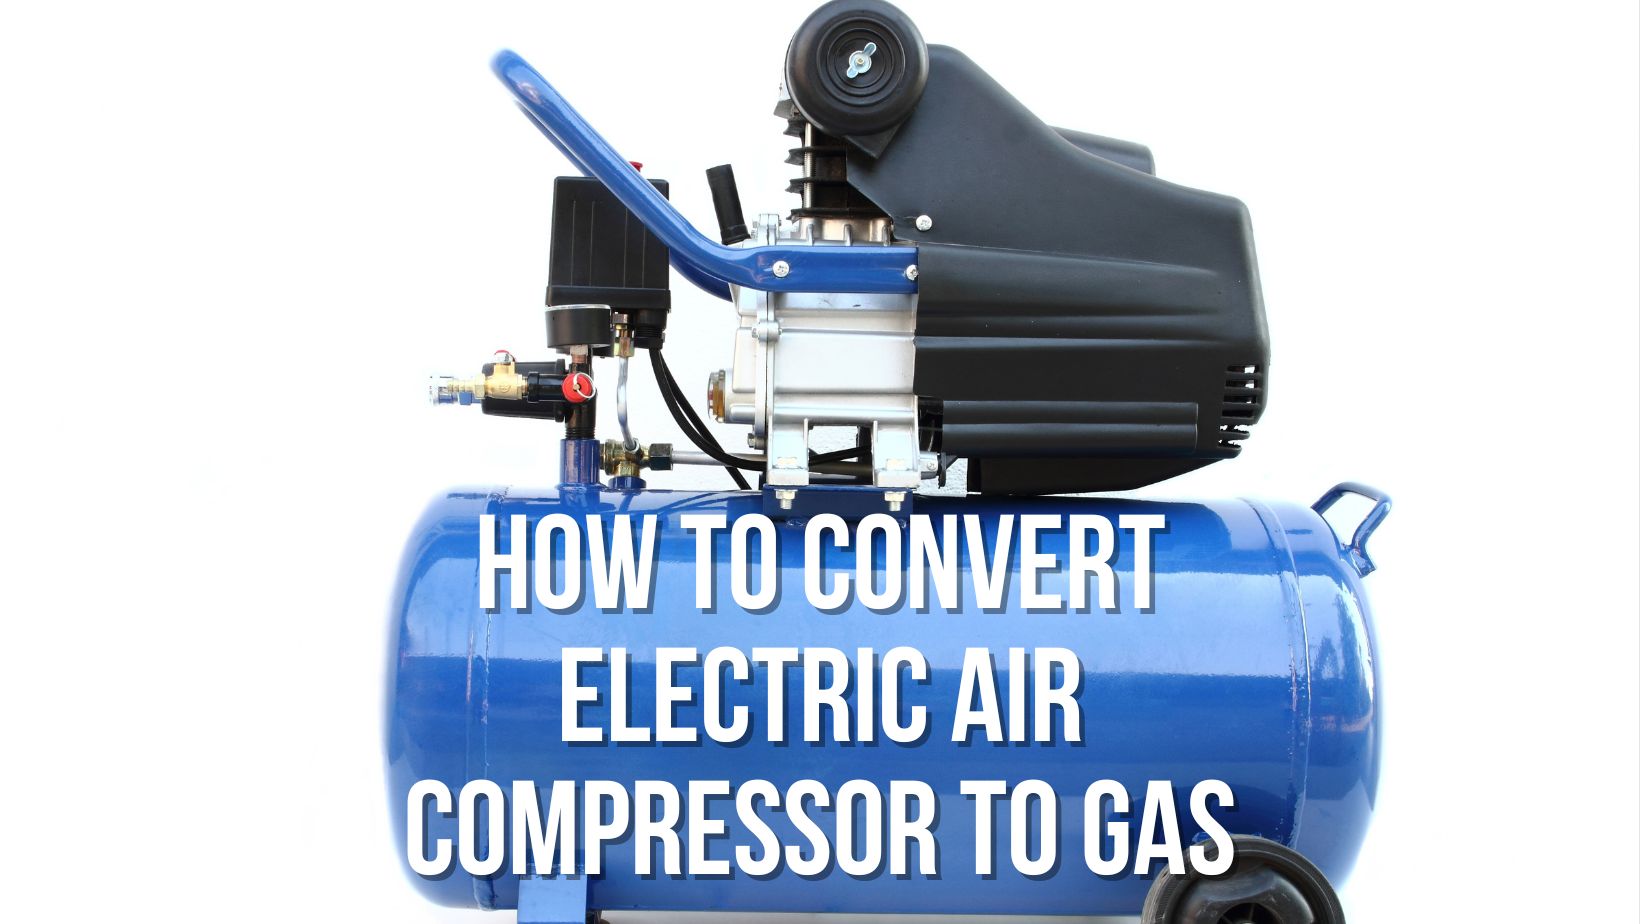 How to Convert Electric Air Compressor to Gas